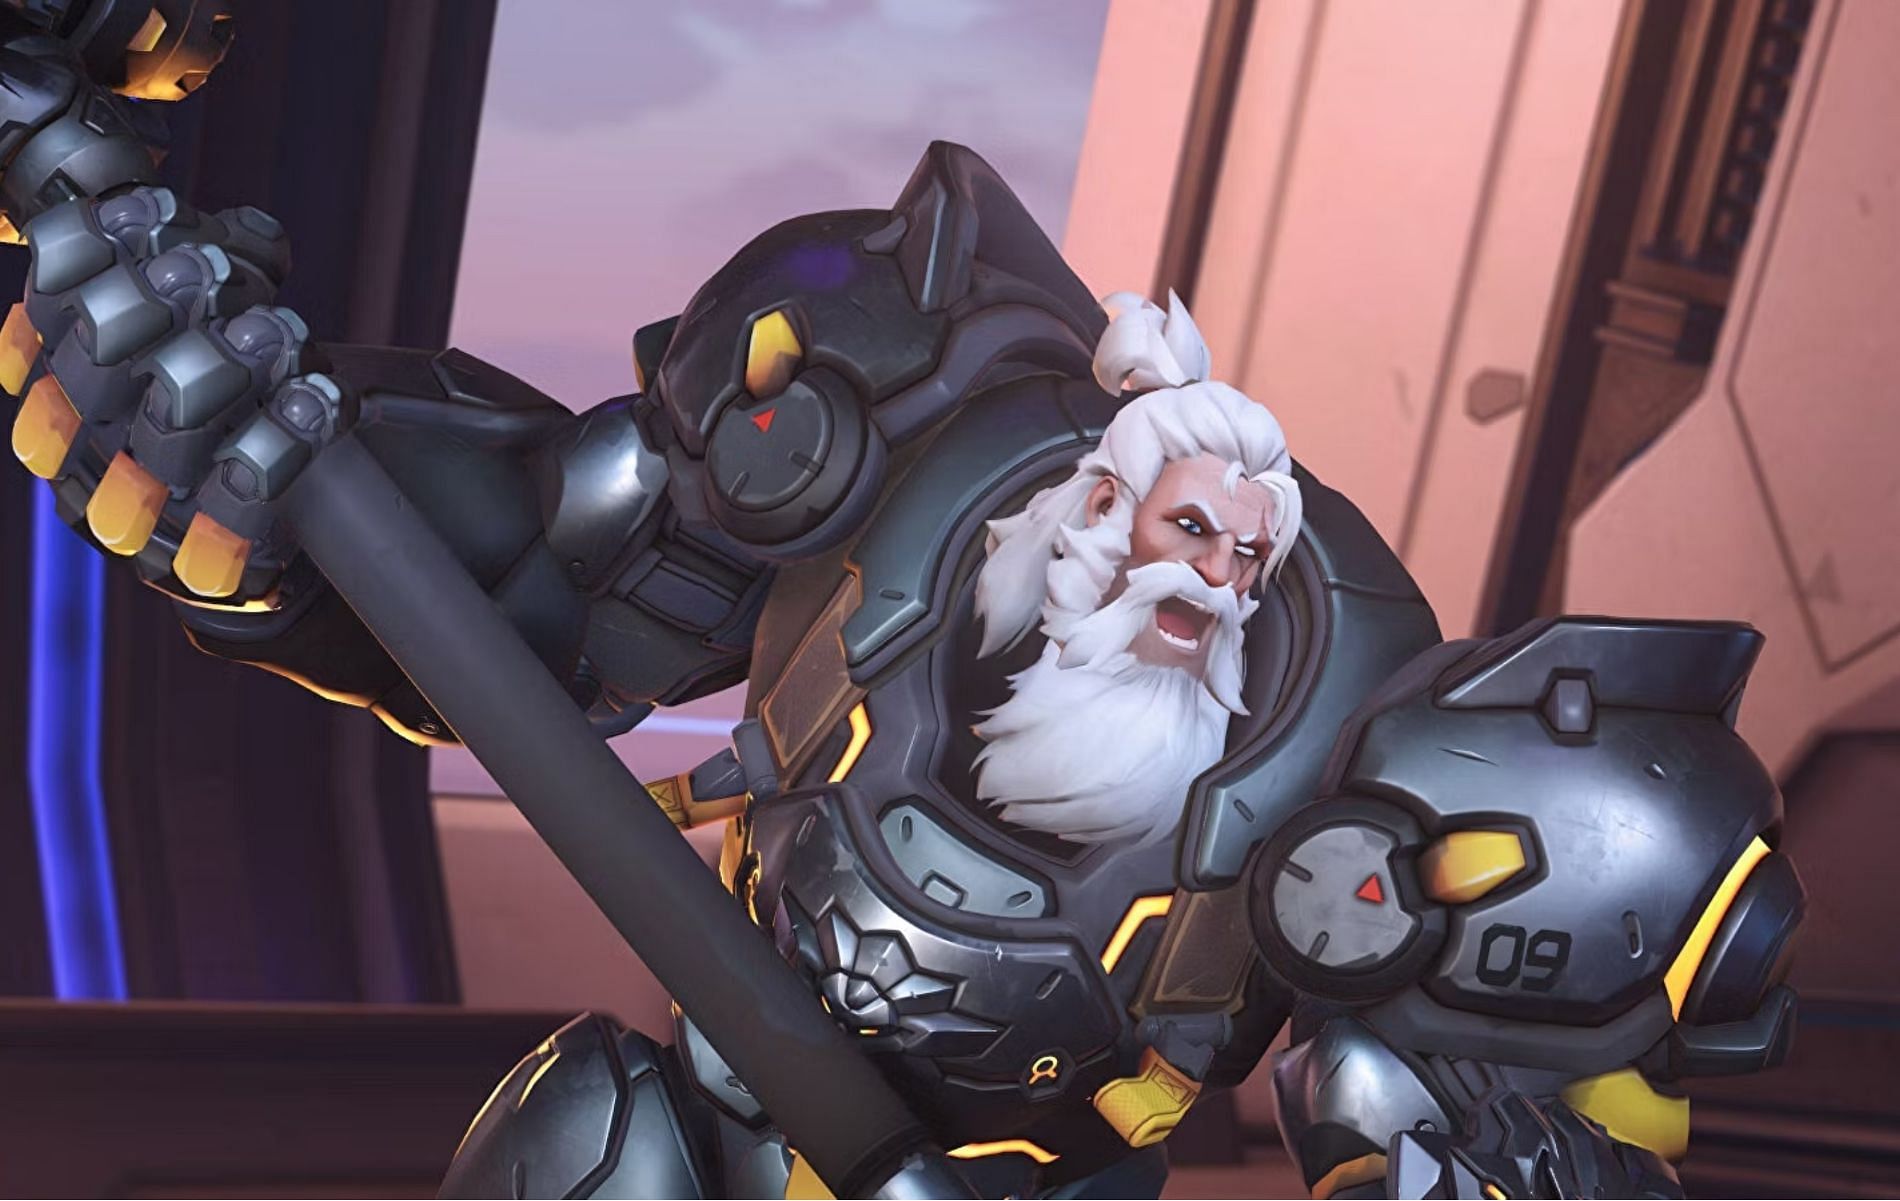 Among all the Tanks in Overwatch, Reinhardt can absorb the most amount of damage (Image via Blizzard Entertainment)